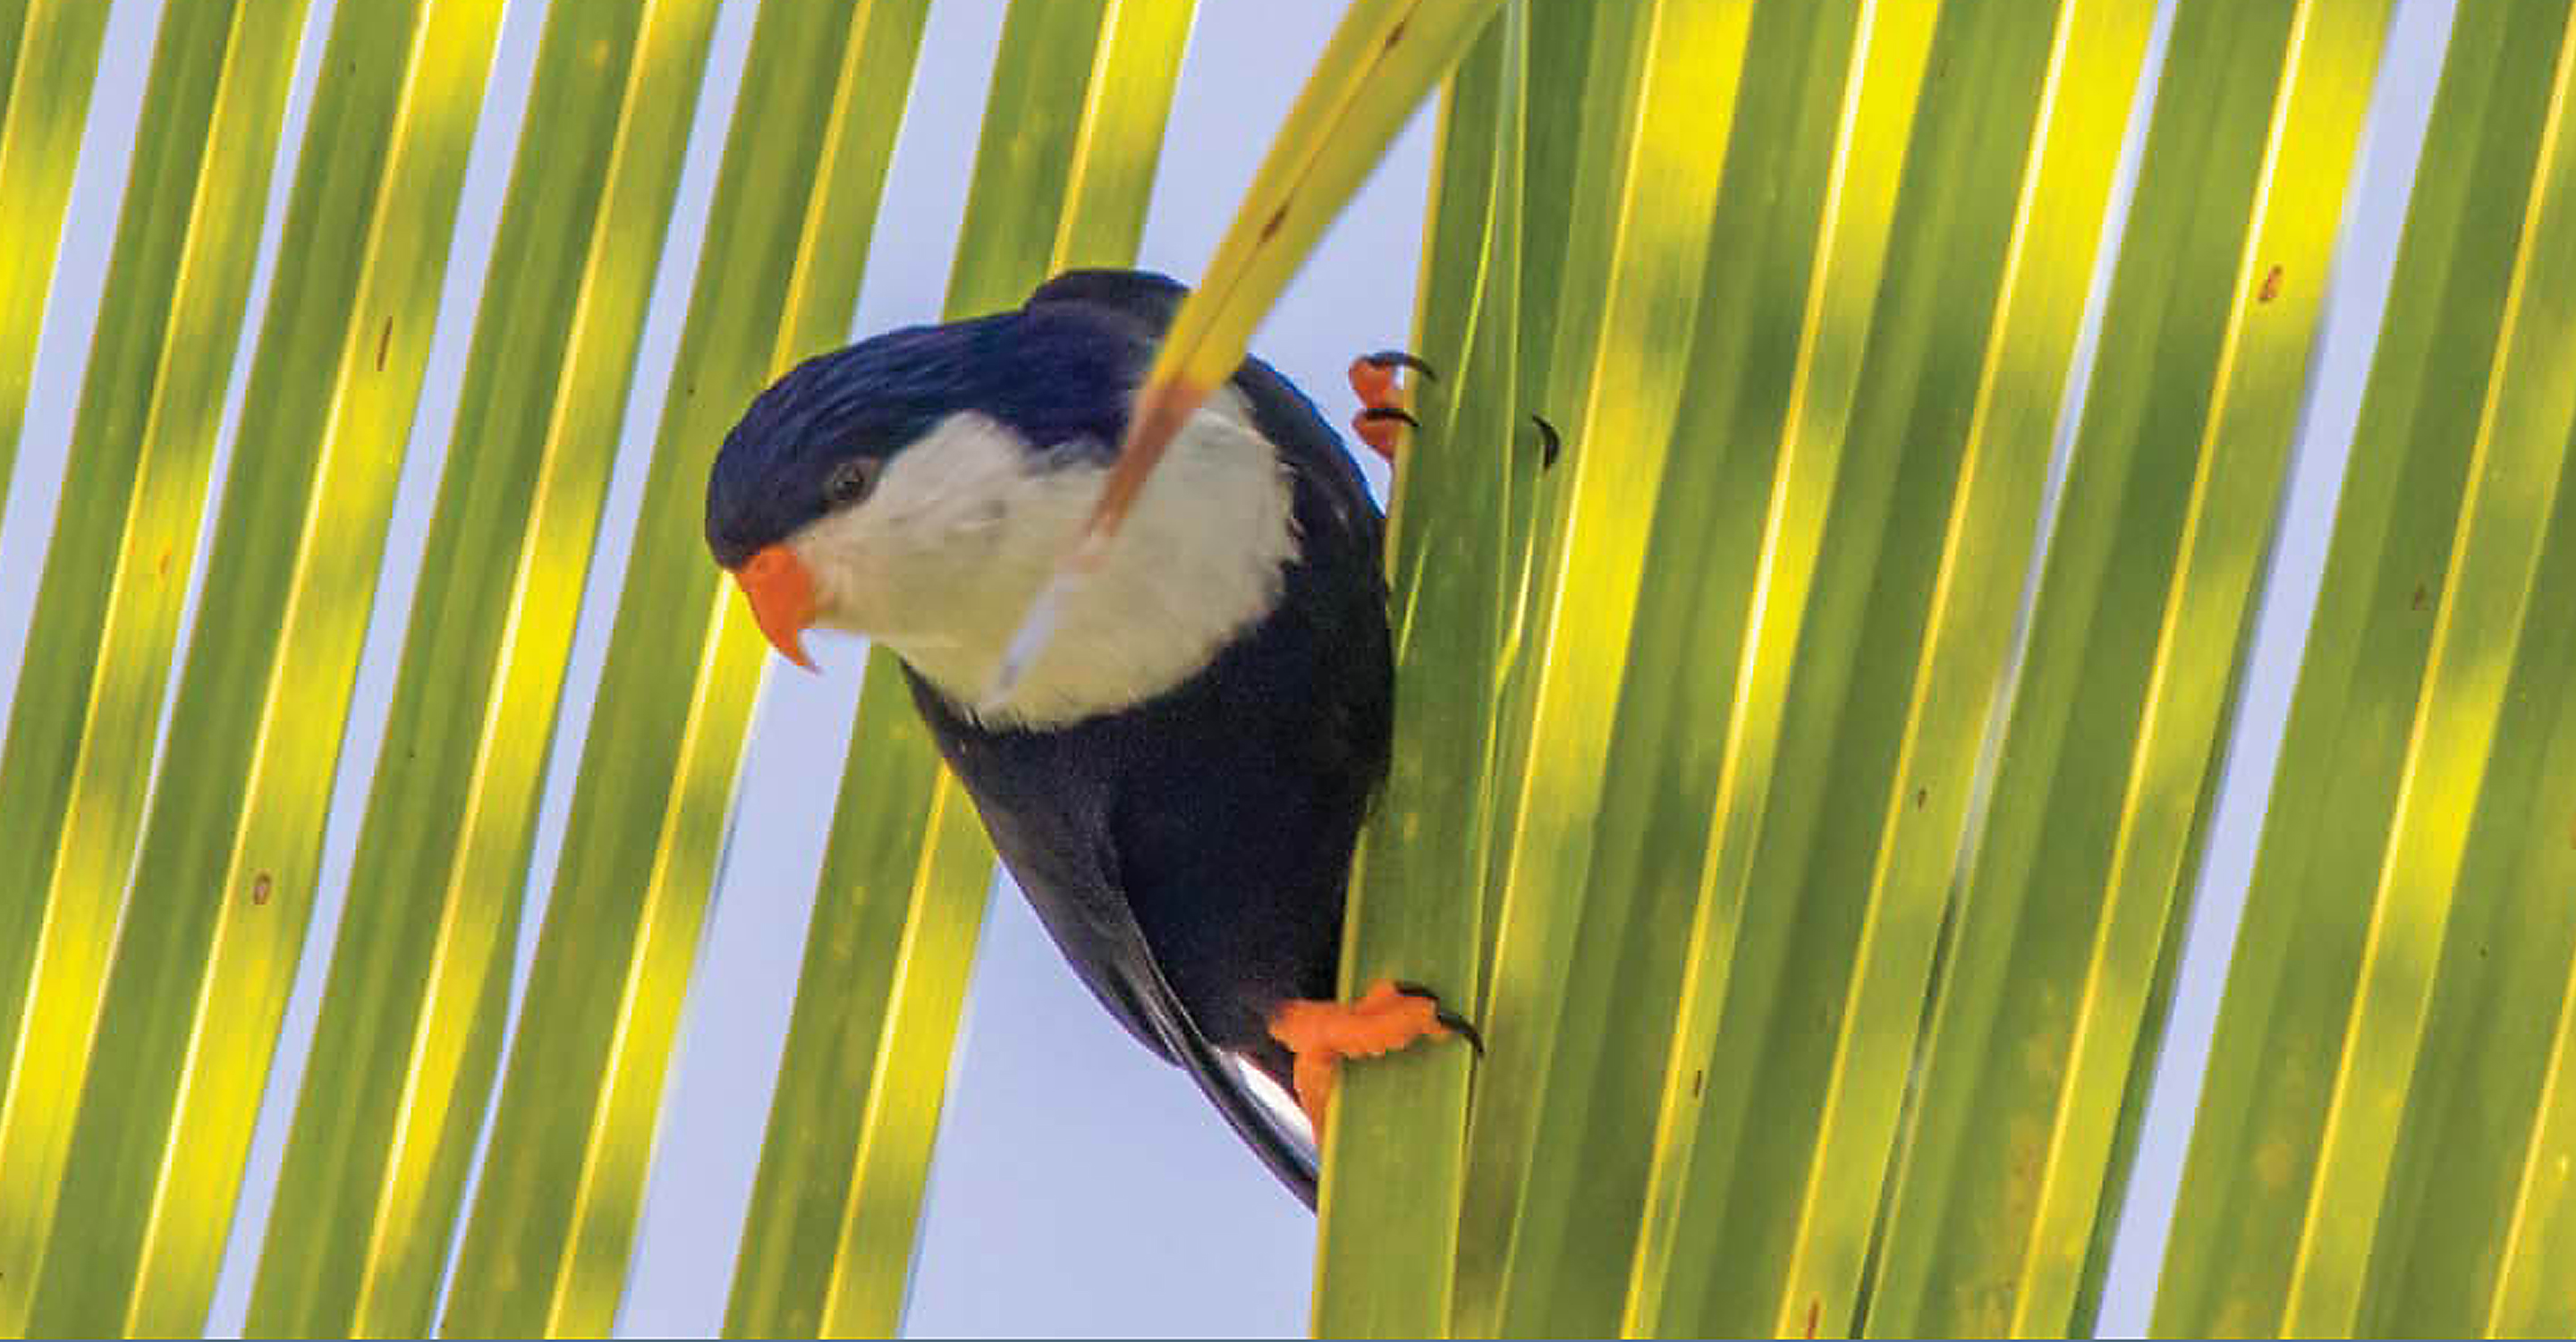 A bird perched on a palm frond, Makatea